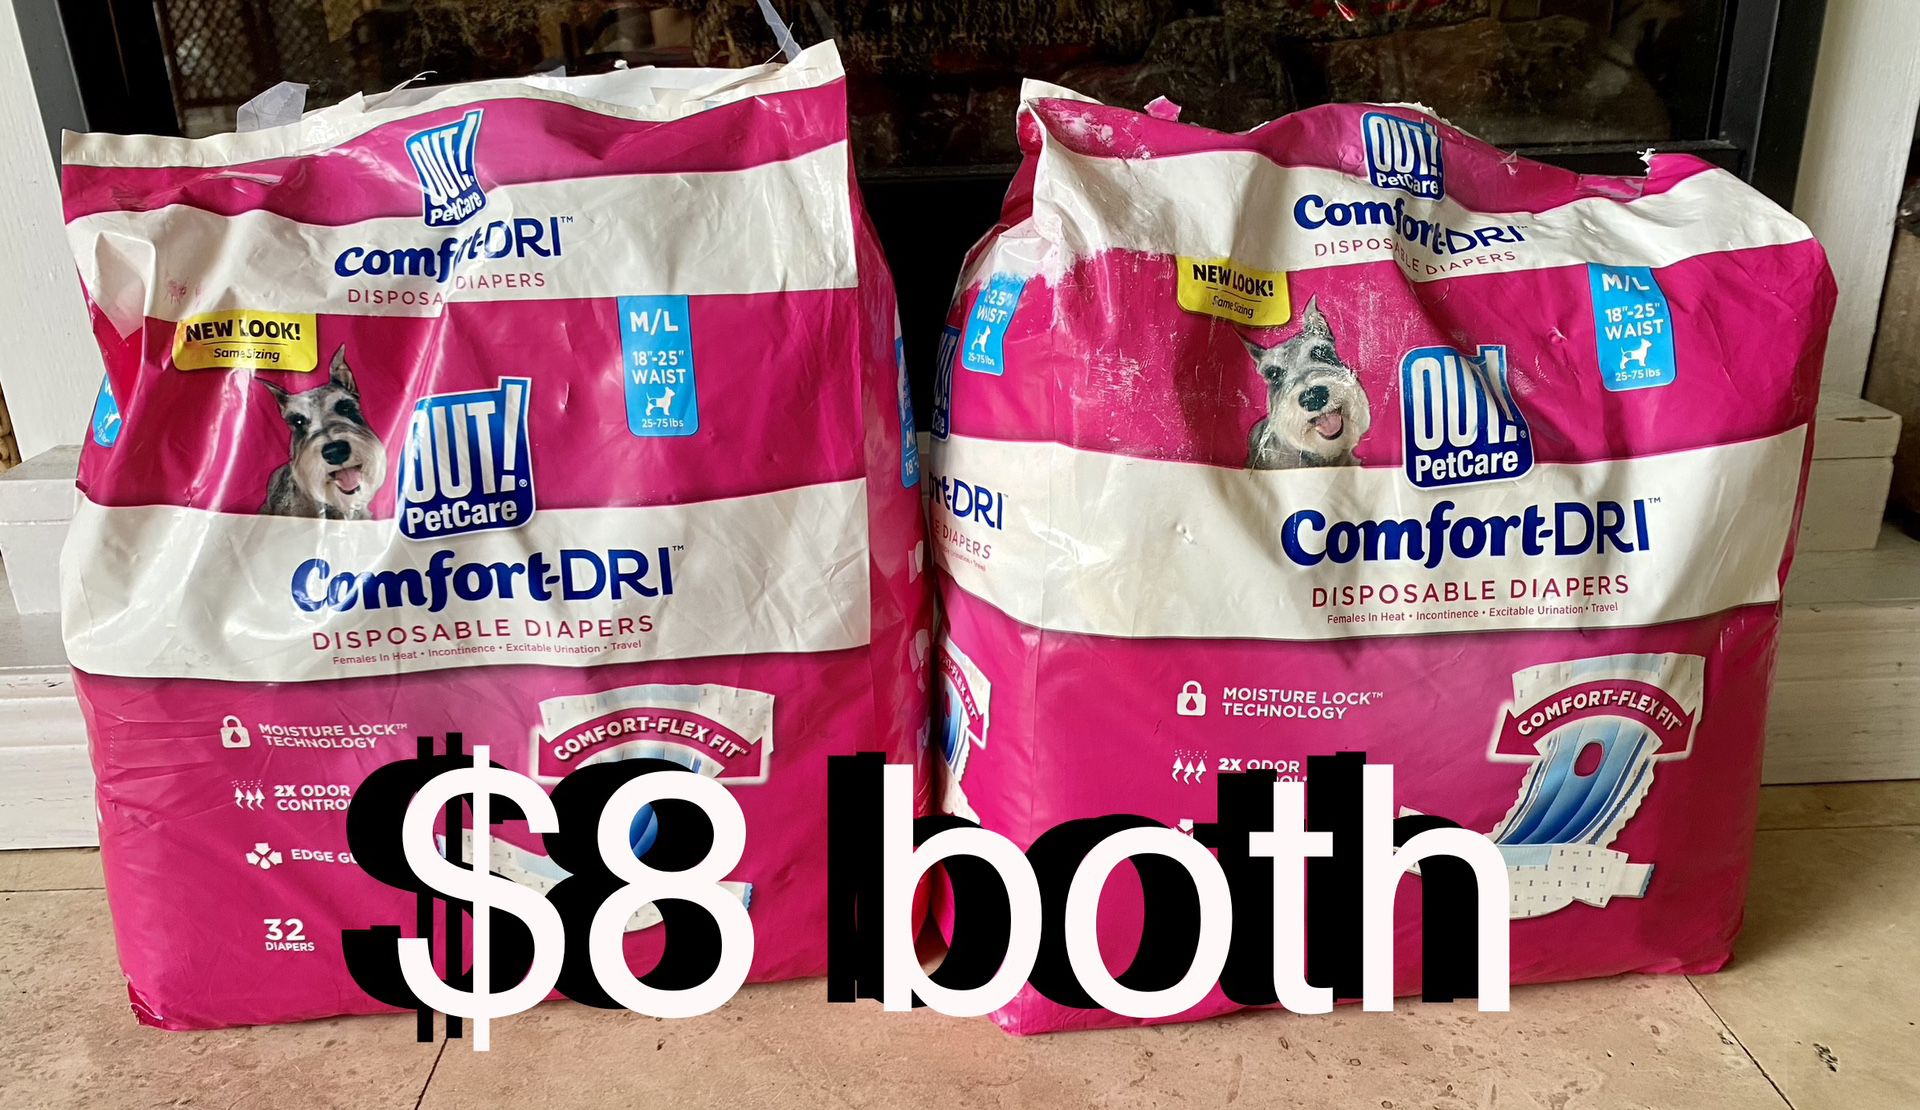 $8 Bundle of Out! Petcare Disposable Diapers pet training diapers